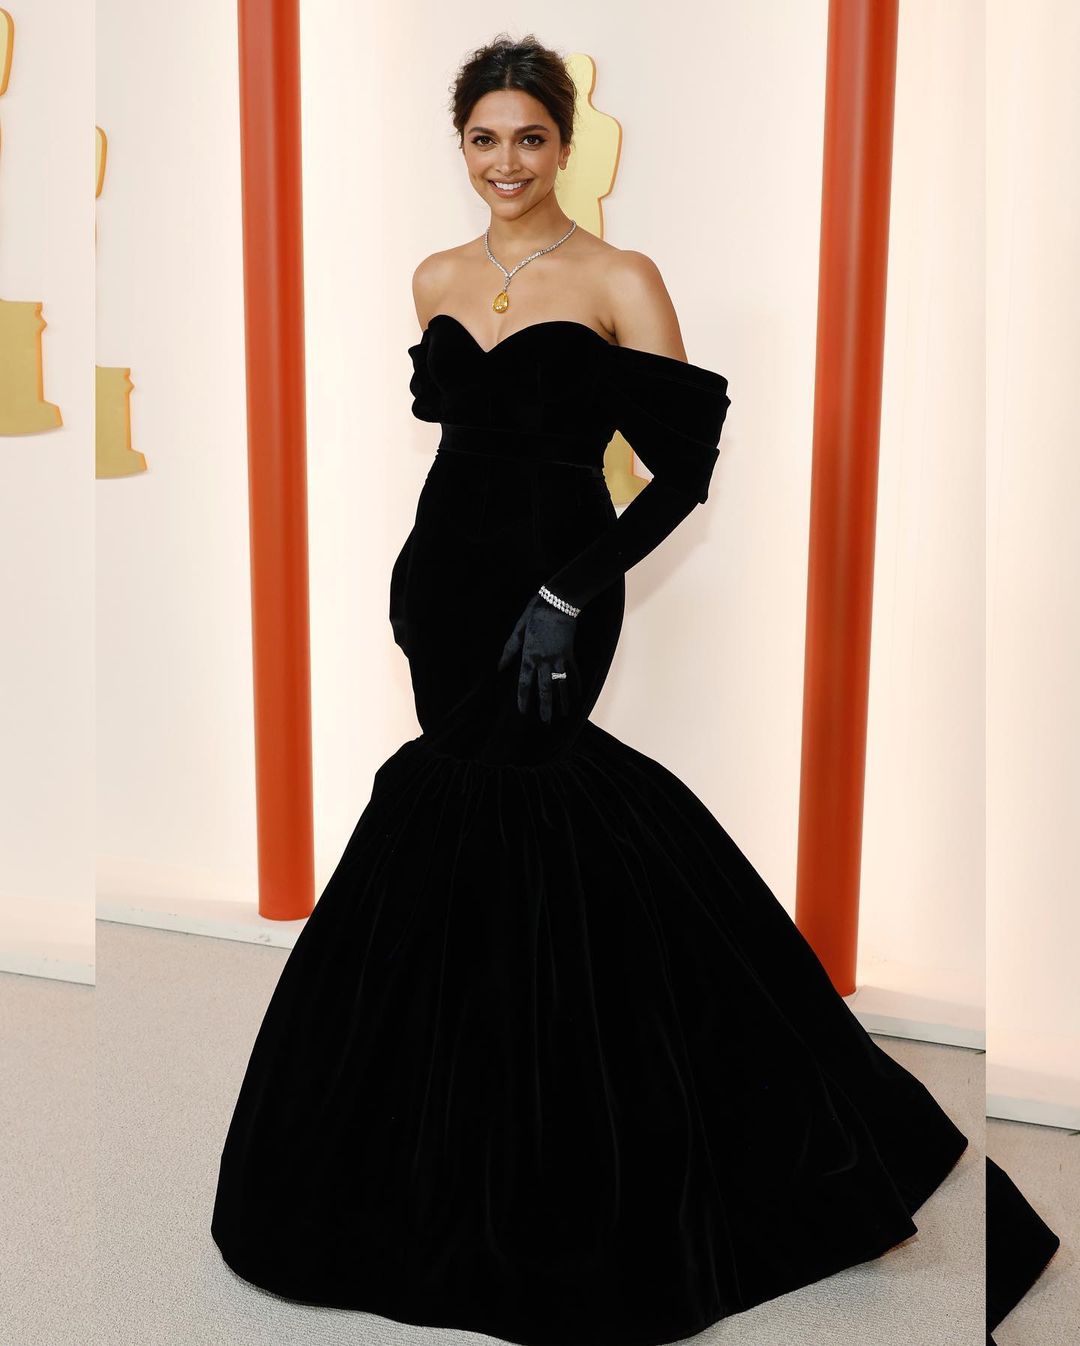 Deepika Padukone looked classy in an off-shoulder mermaid-style gown by Louis Vuitton.